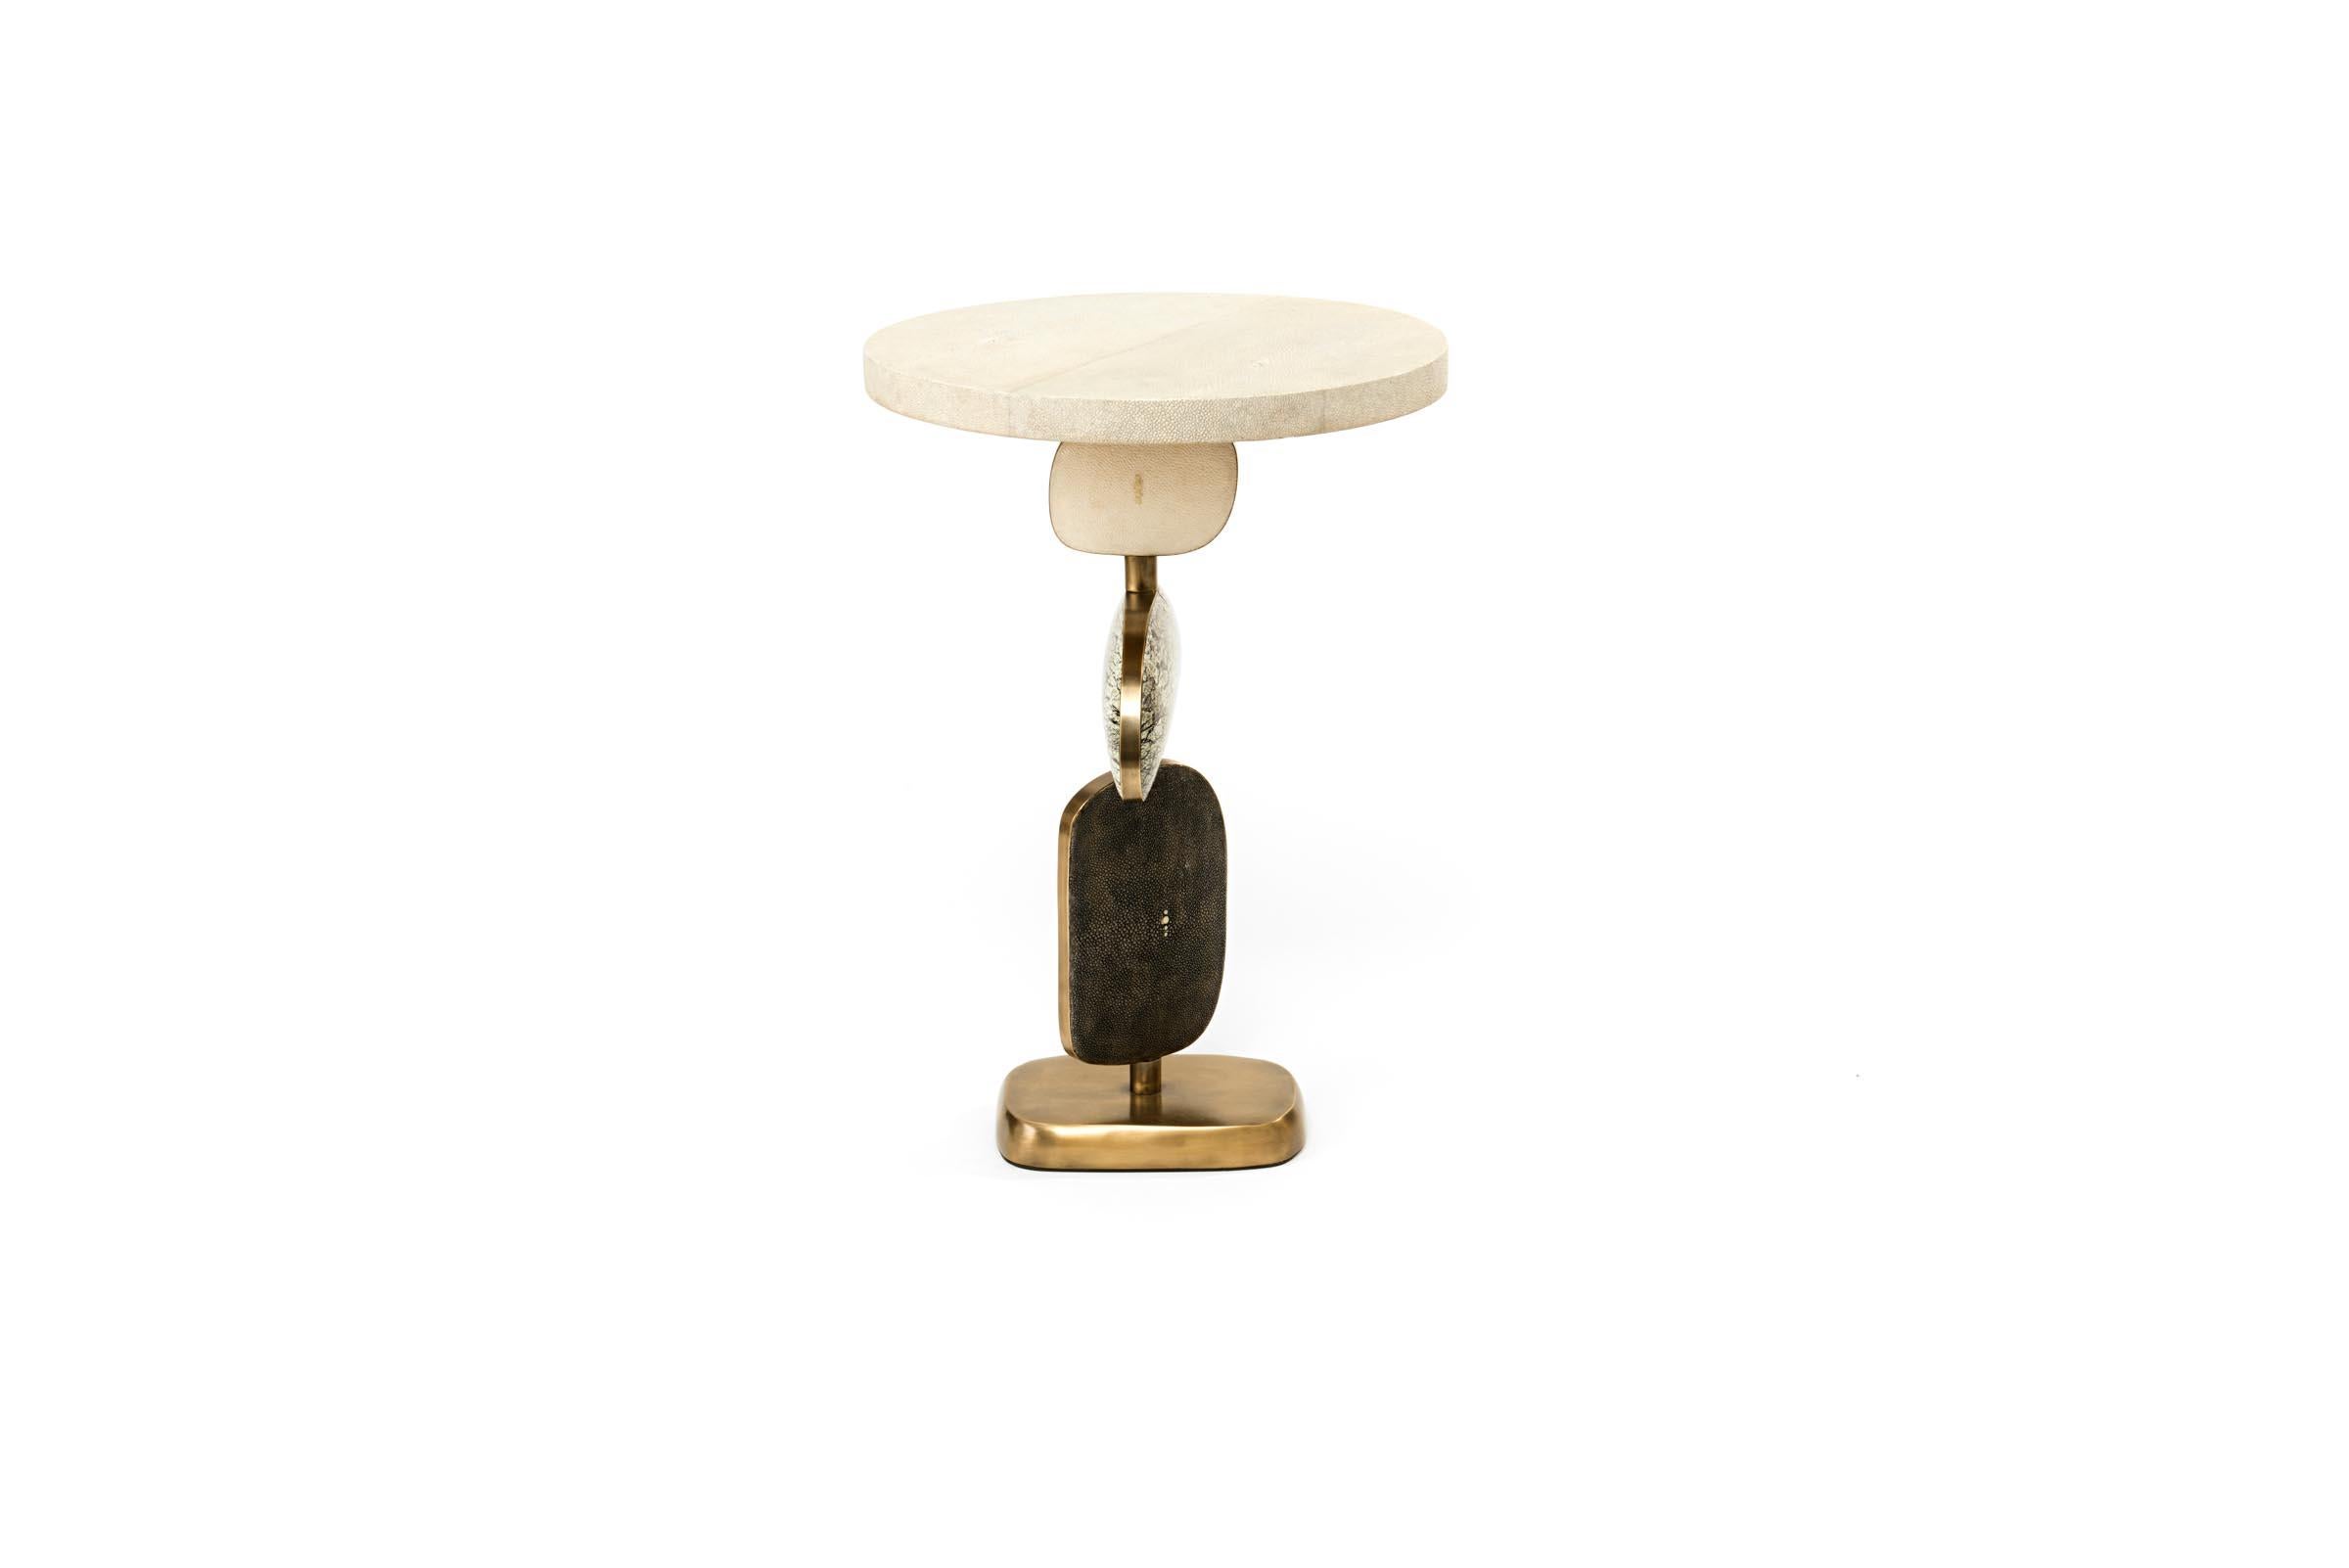 French Shagreen Side Table with Mobile Sculptural Parts and Brass Accents by Kifu Paris